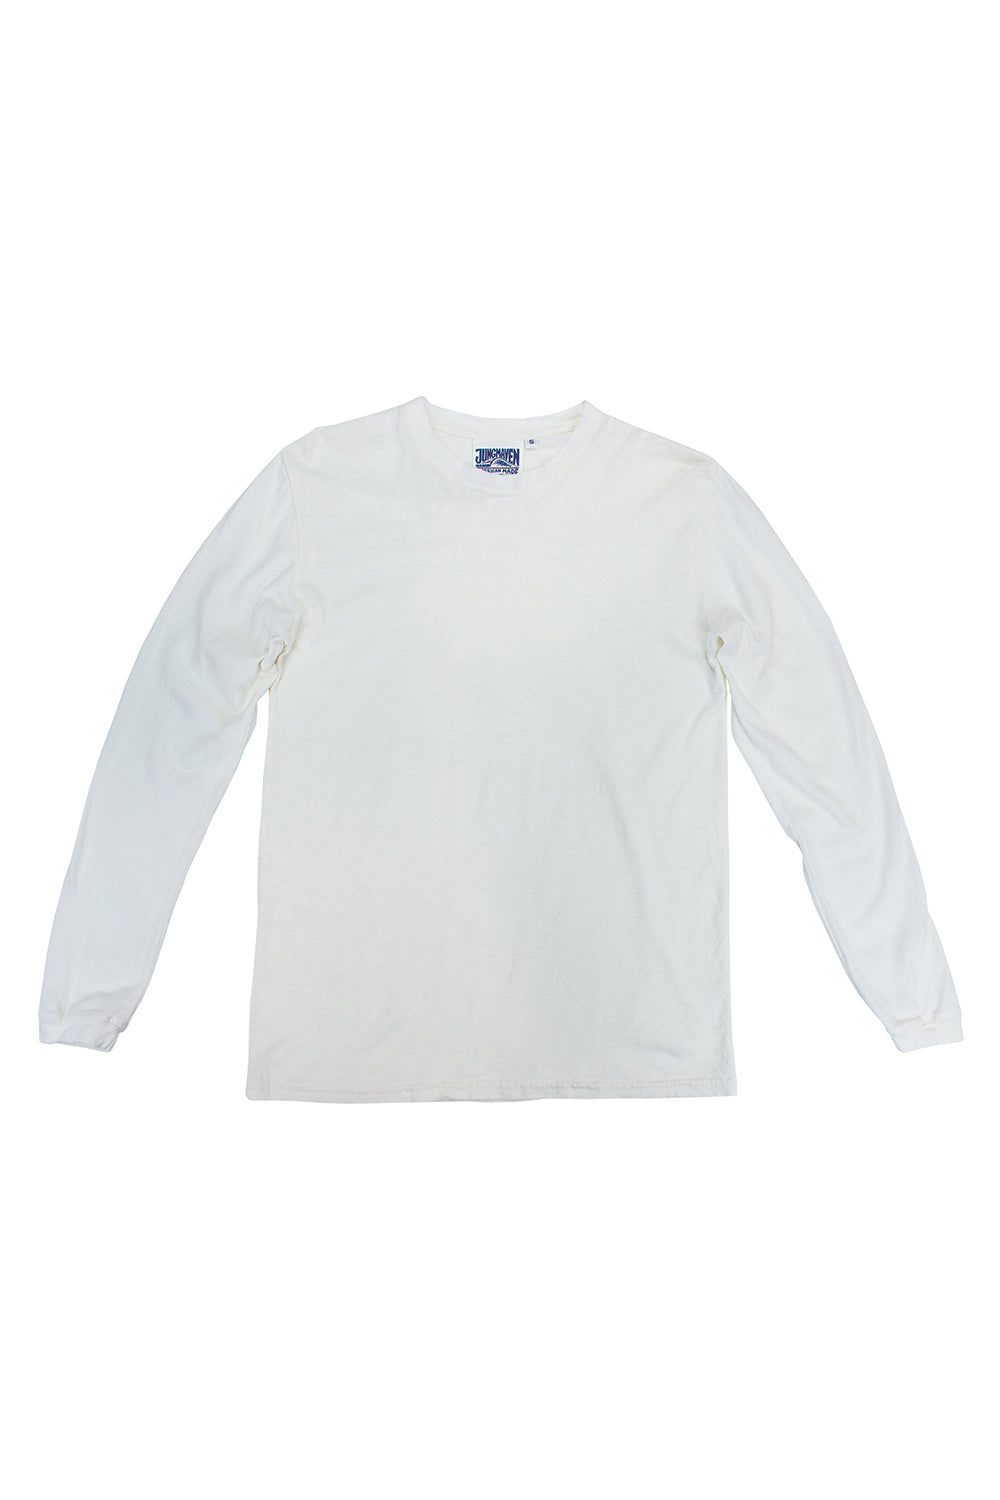 Jung Long Sleeve Tee | Jungmaven Hemp Clothing & Accessories Washed White / S